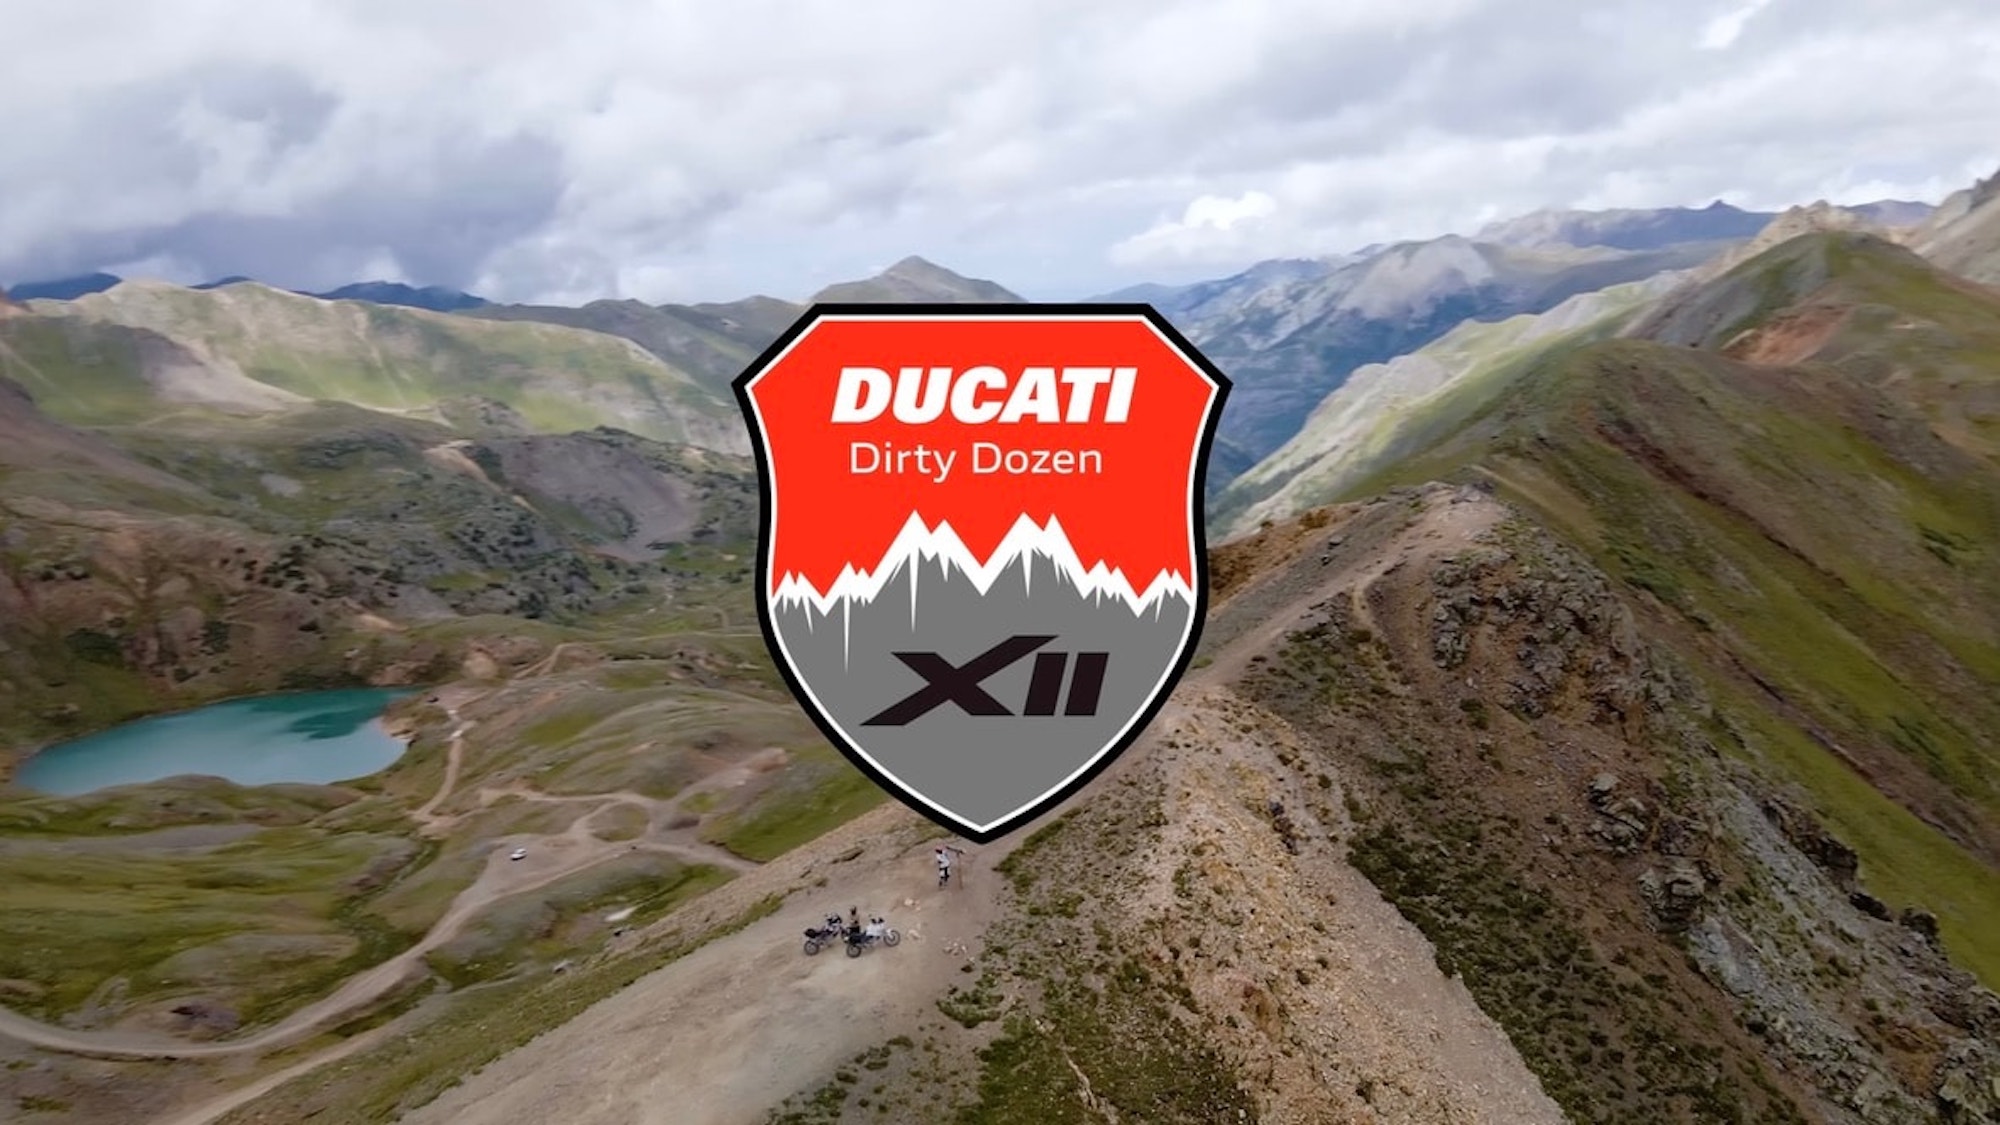 The logo for Ducati's “Dirty Dozen” Challenge. Media sourced from Ducati.